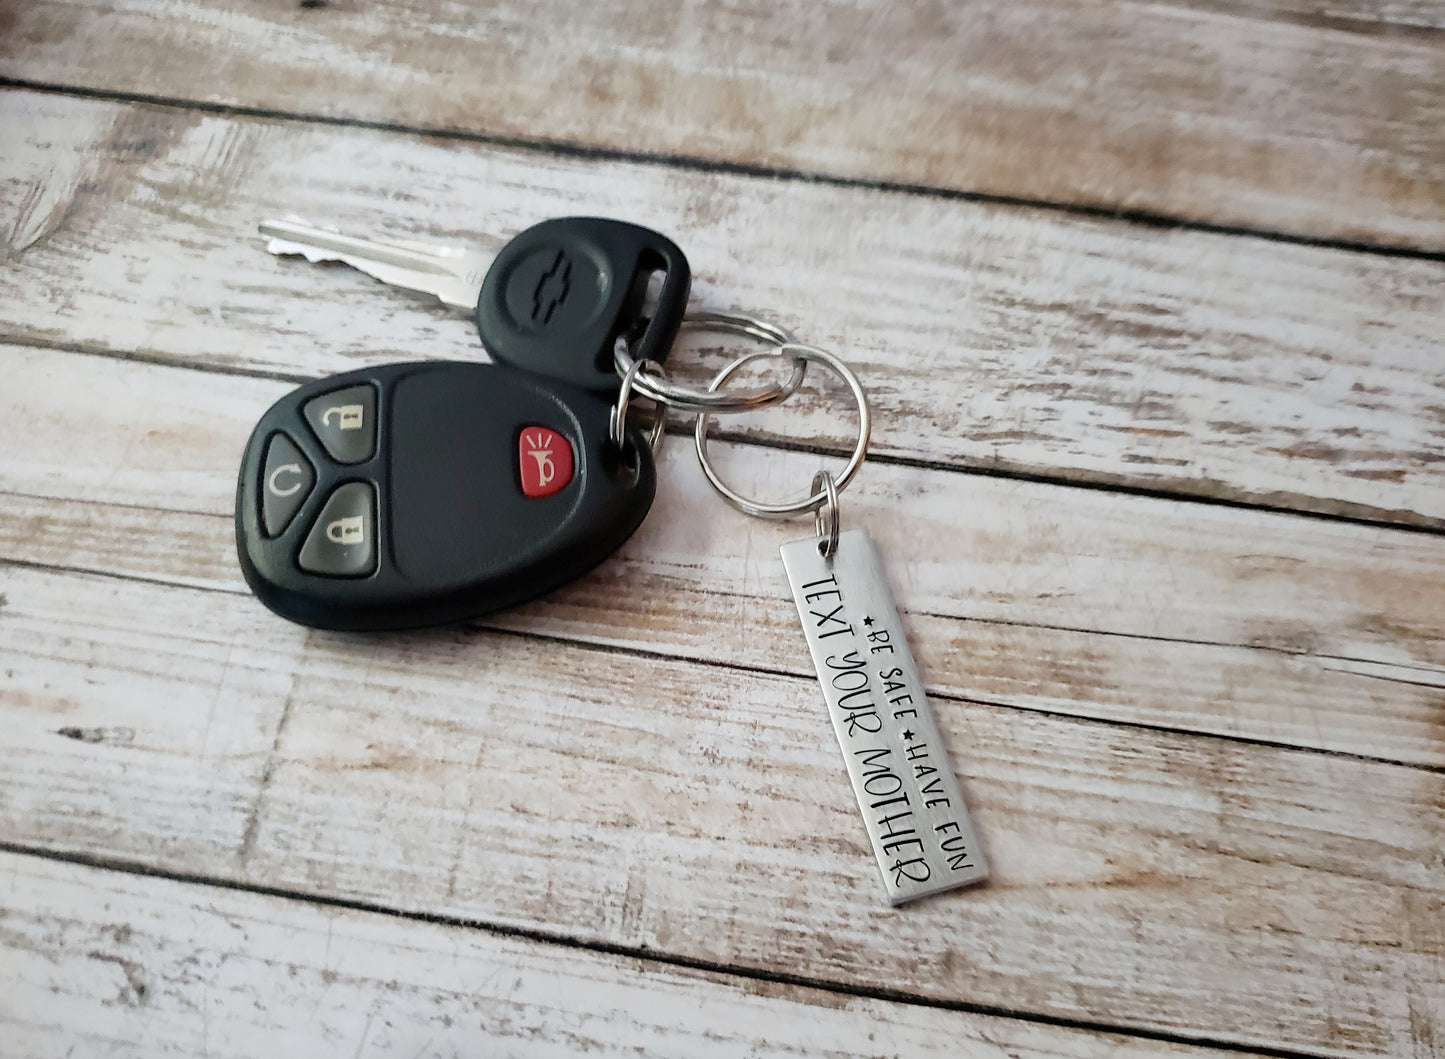 Be Safe Have Fun Text Your Mother Key Chain, Cute Reminders for Your Kids, Metal Stamped Keychain, Gift for New Drivers